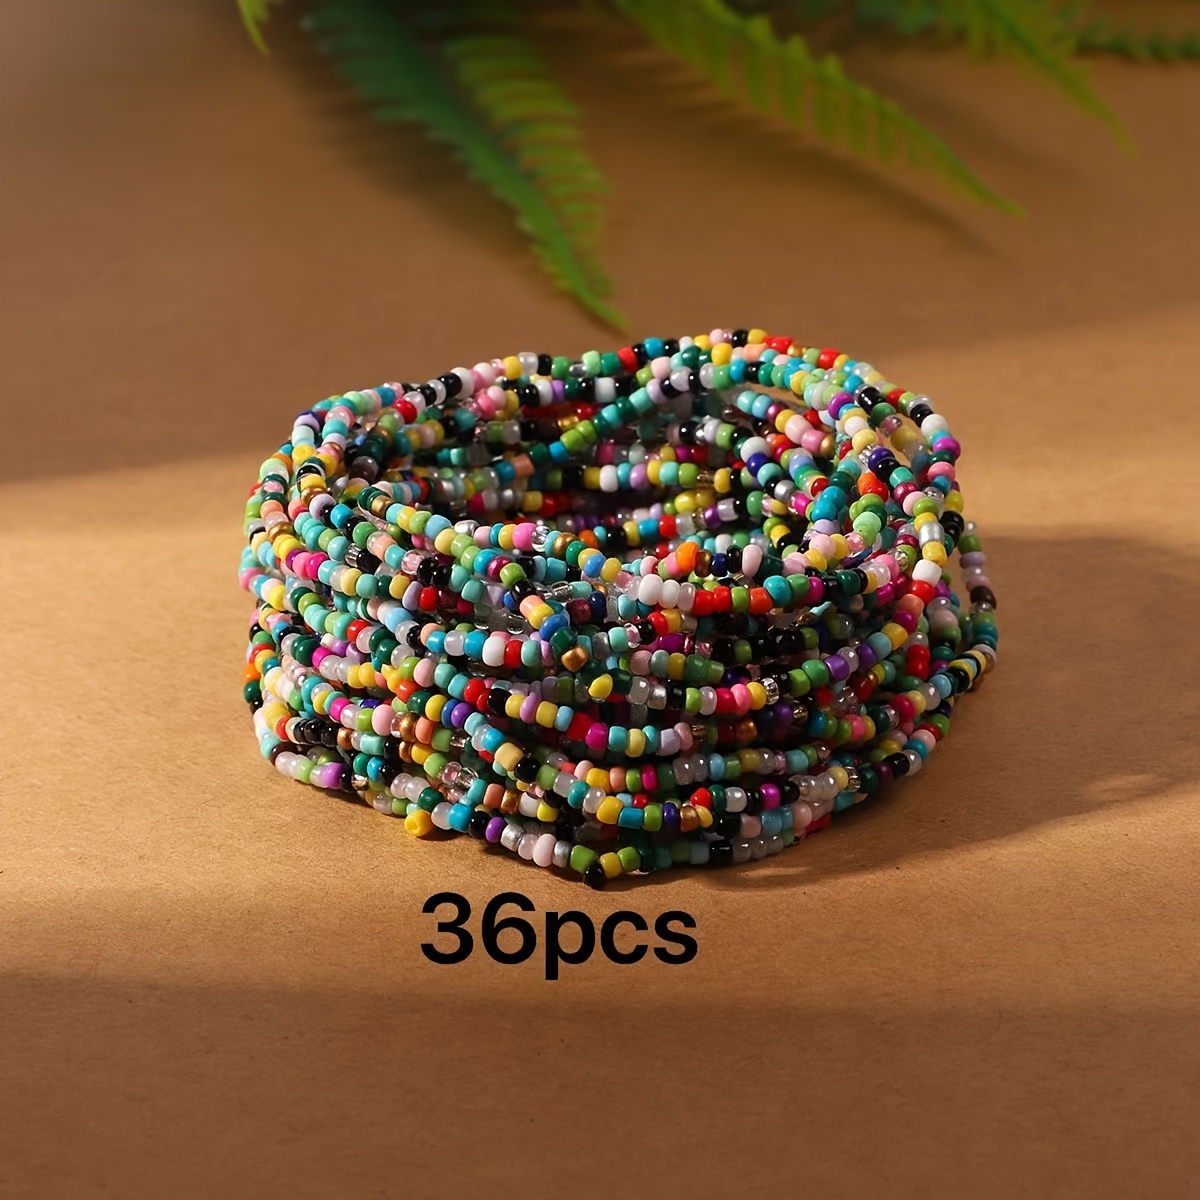 

36pcs Bohemian Handcrafted Beaded Stretch Bracelet Set, Multicolor Seed Bead Layering Bangles For Women, Versatile Boho Style Jewelry For Daily Wear & All Seasons